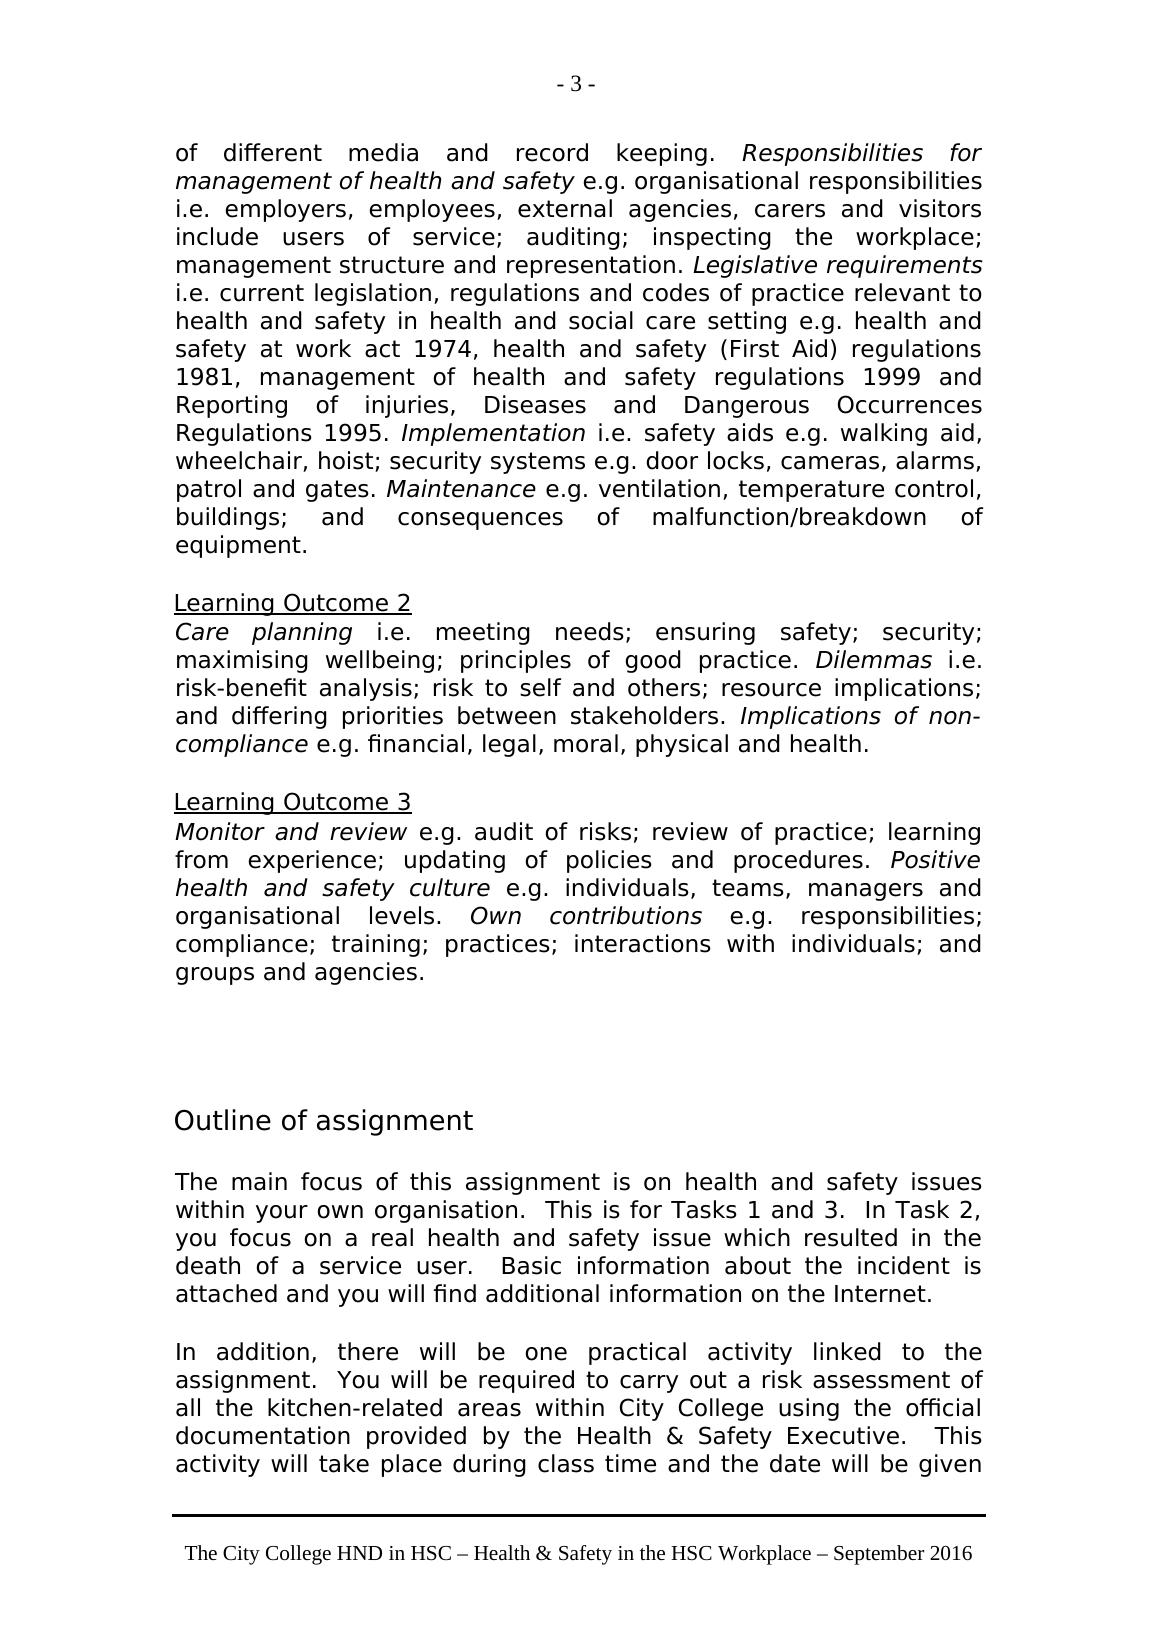 Aspects of the Health and Social Care at Workplace_3